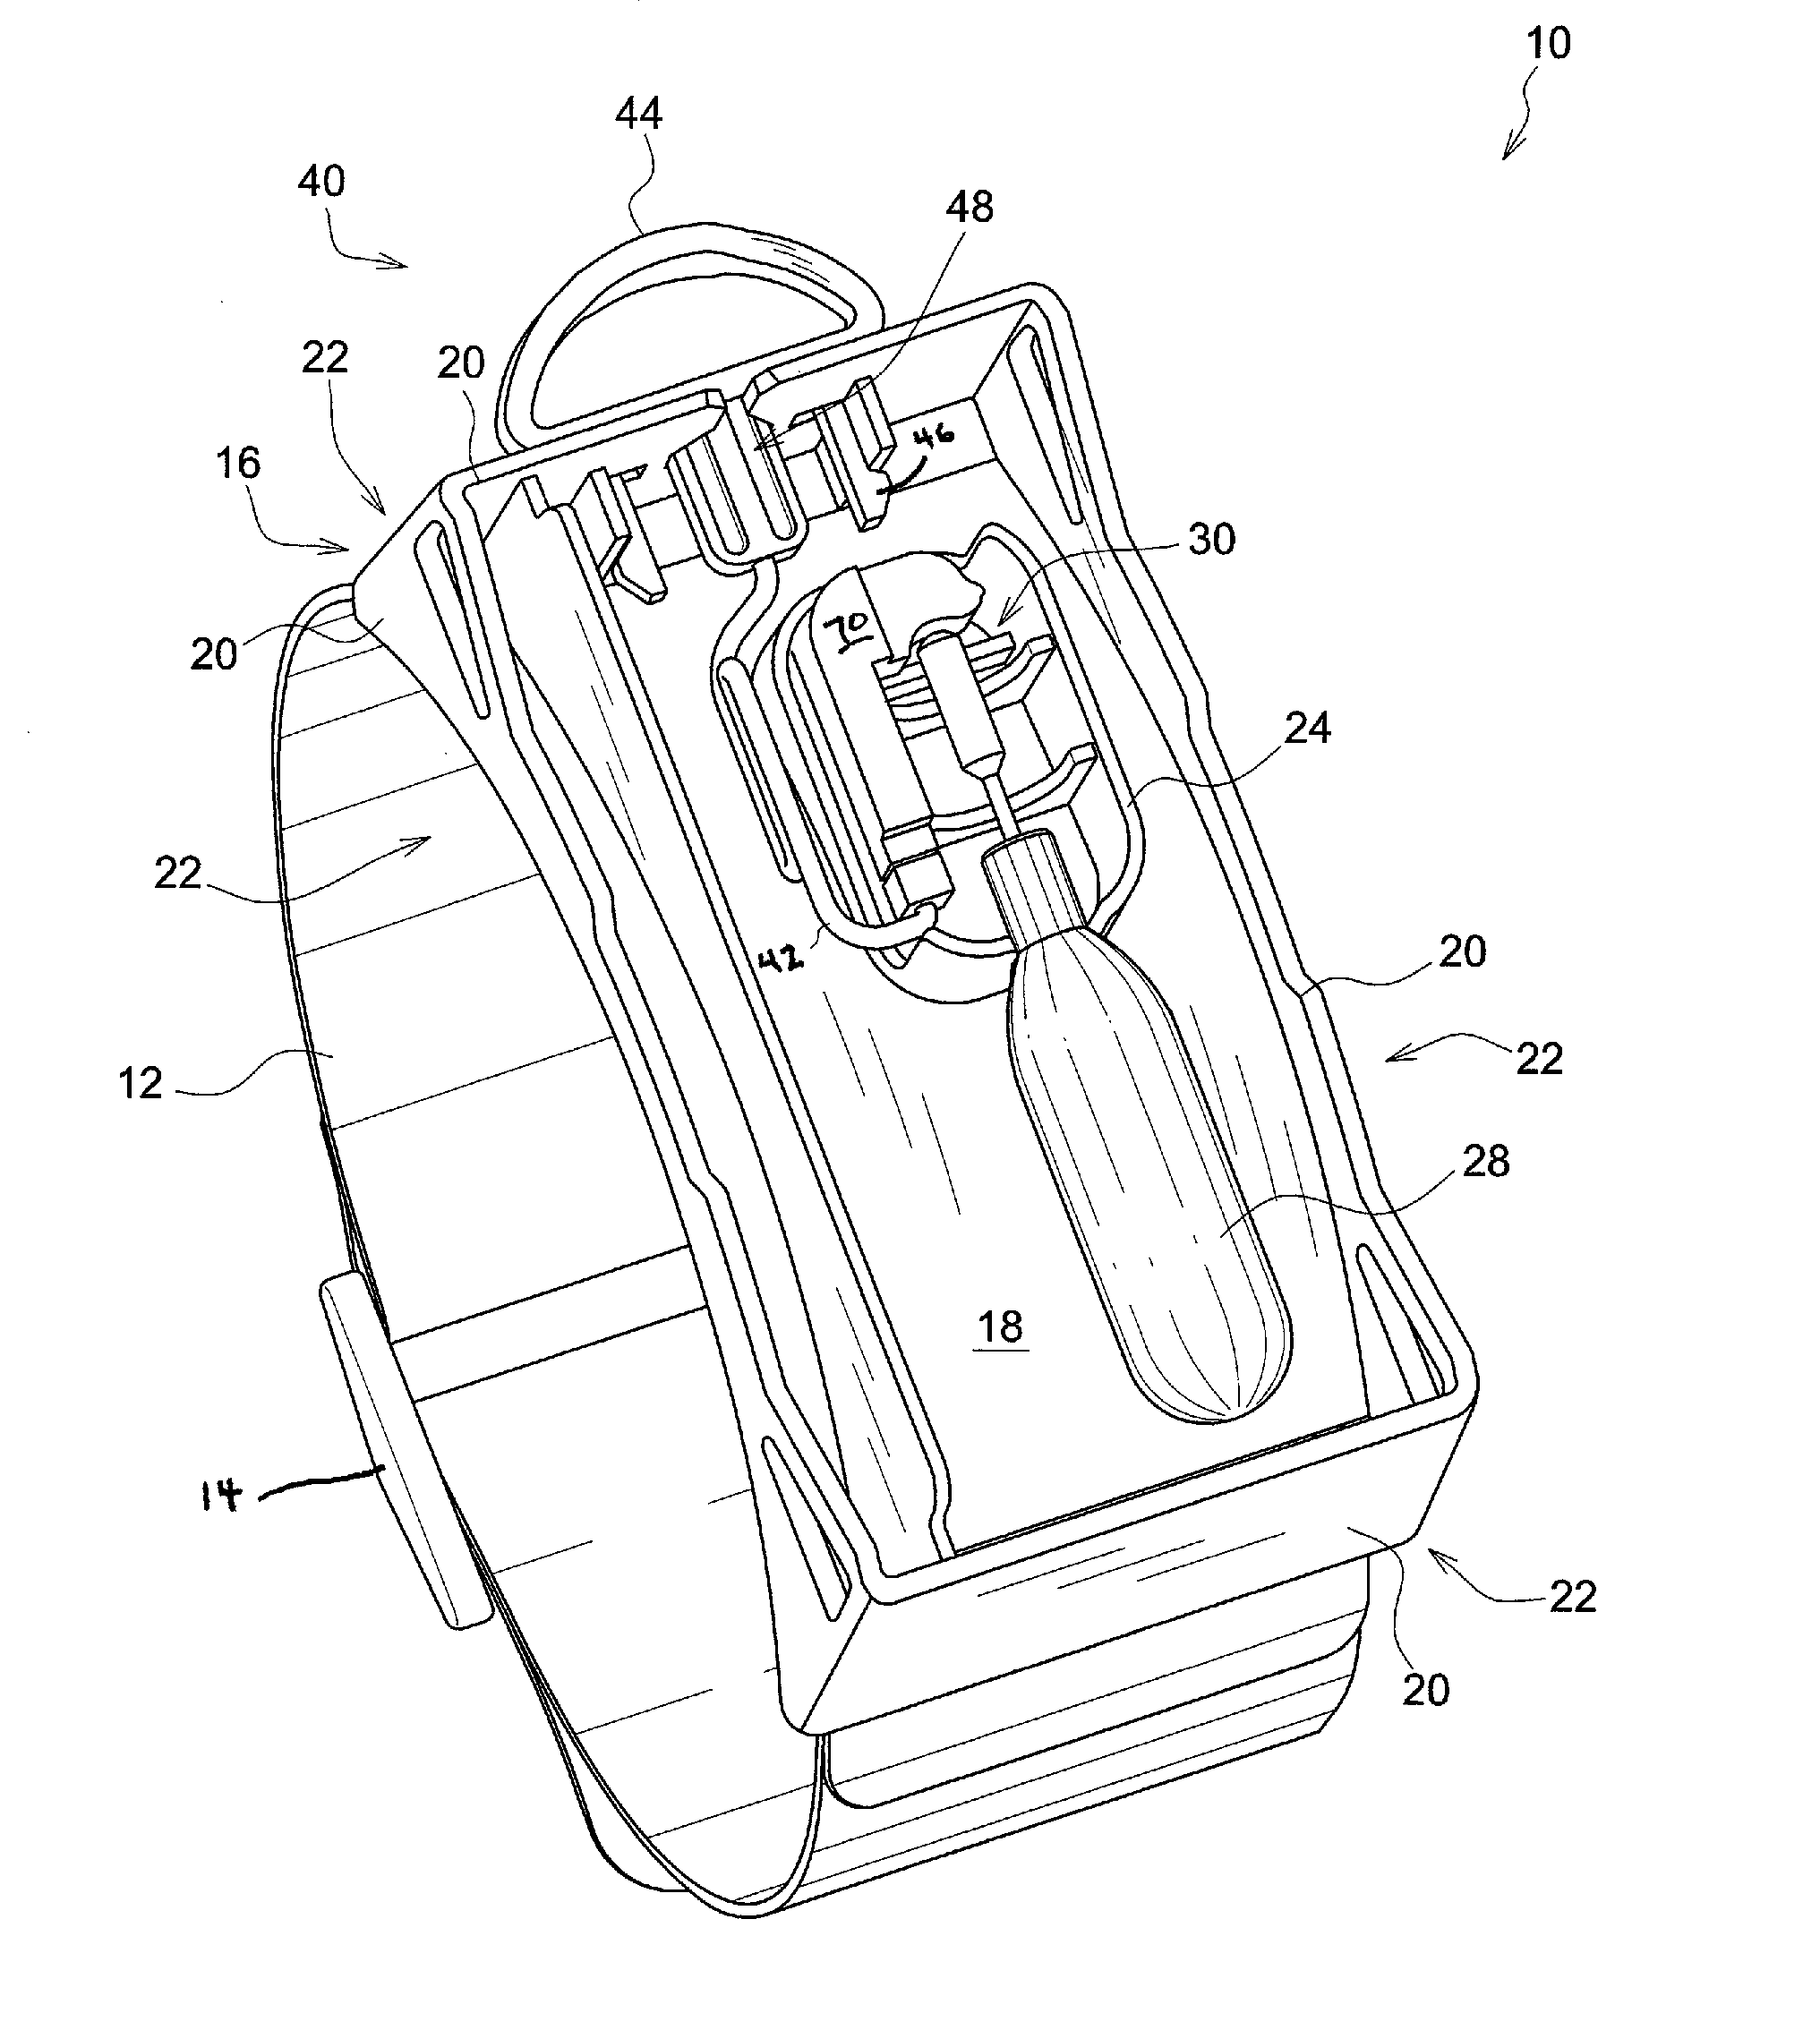 Personal floatation device